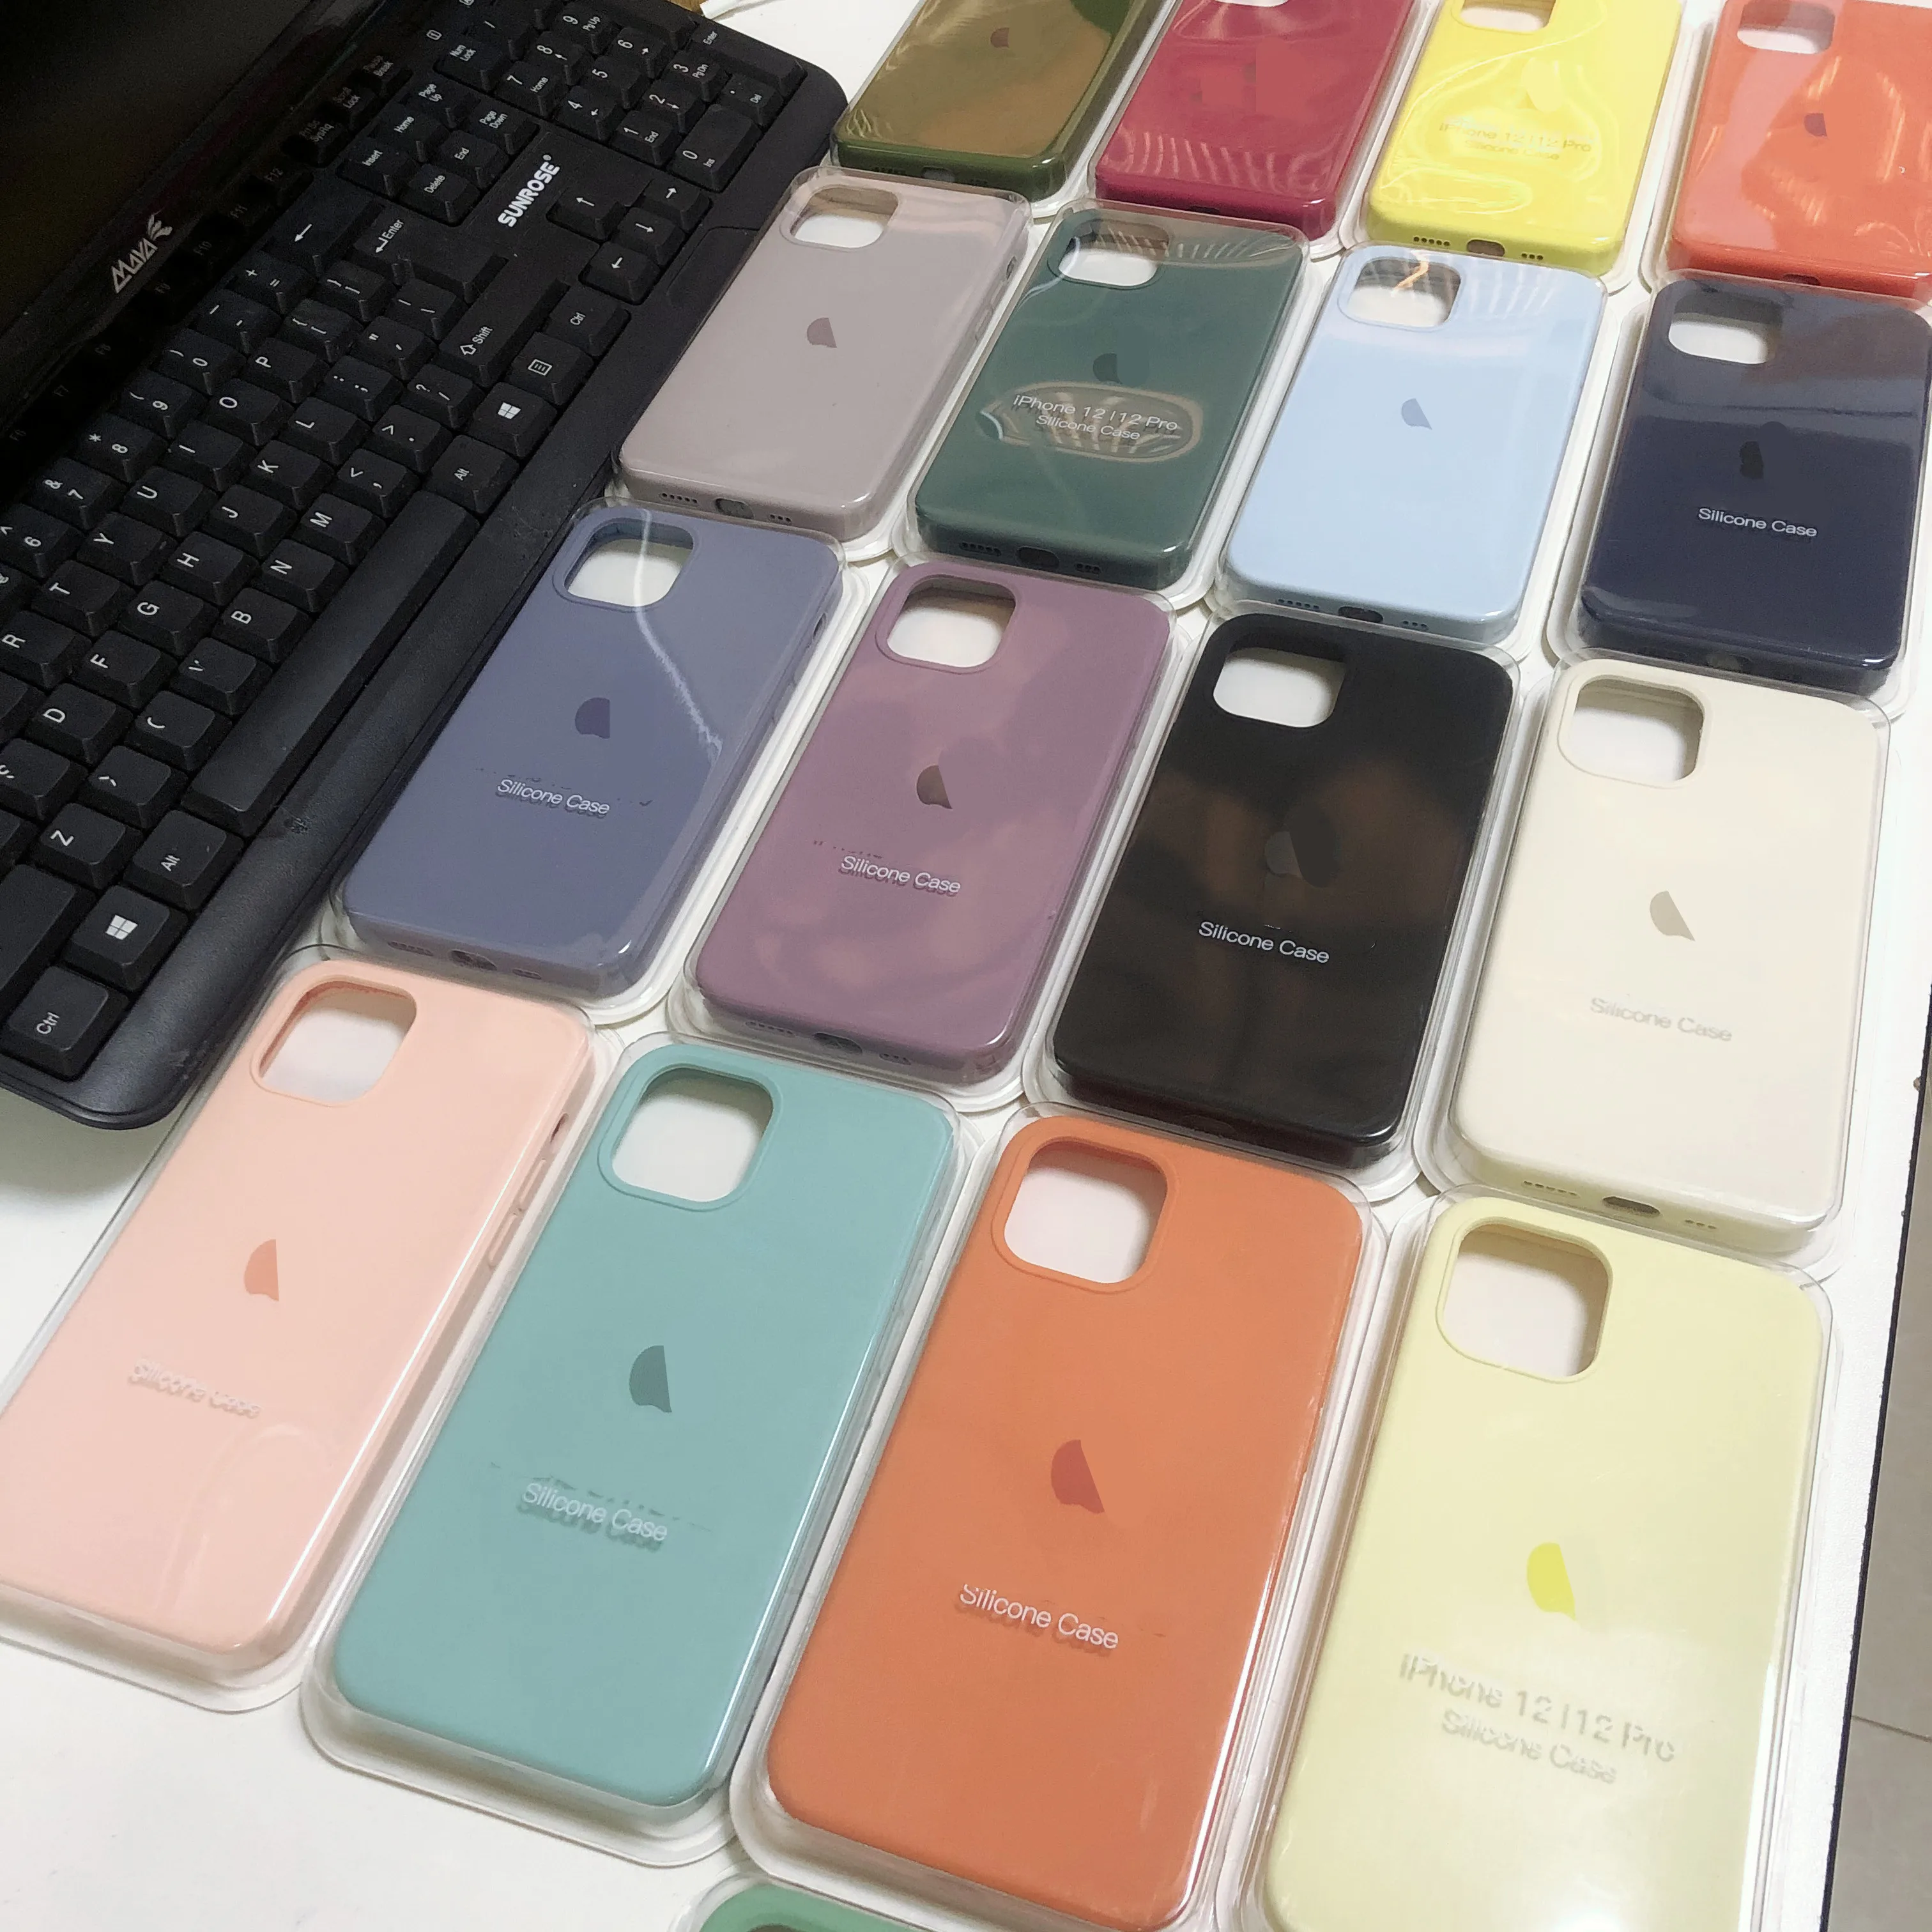 

2021 new fashion With LOGO Liquid Silicone Official Original Case for apple iphone 12 11 pro max xs x xr 6 6s 7 8 plus se 2020, 63 colors